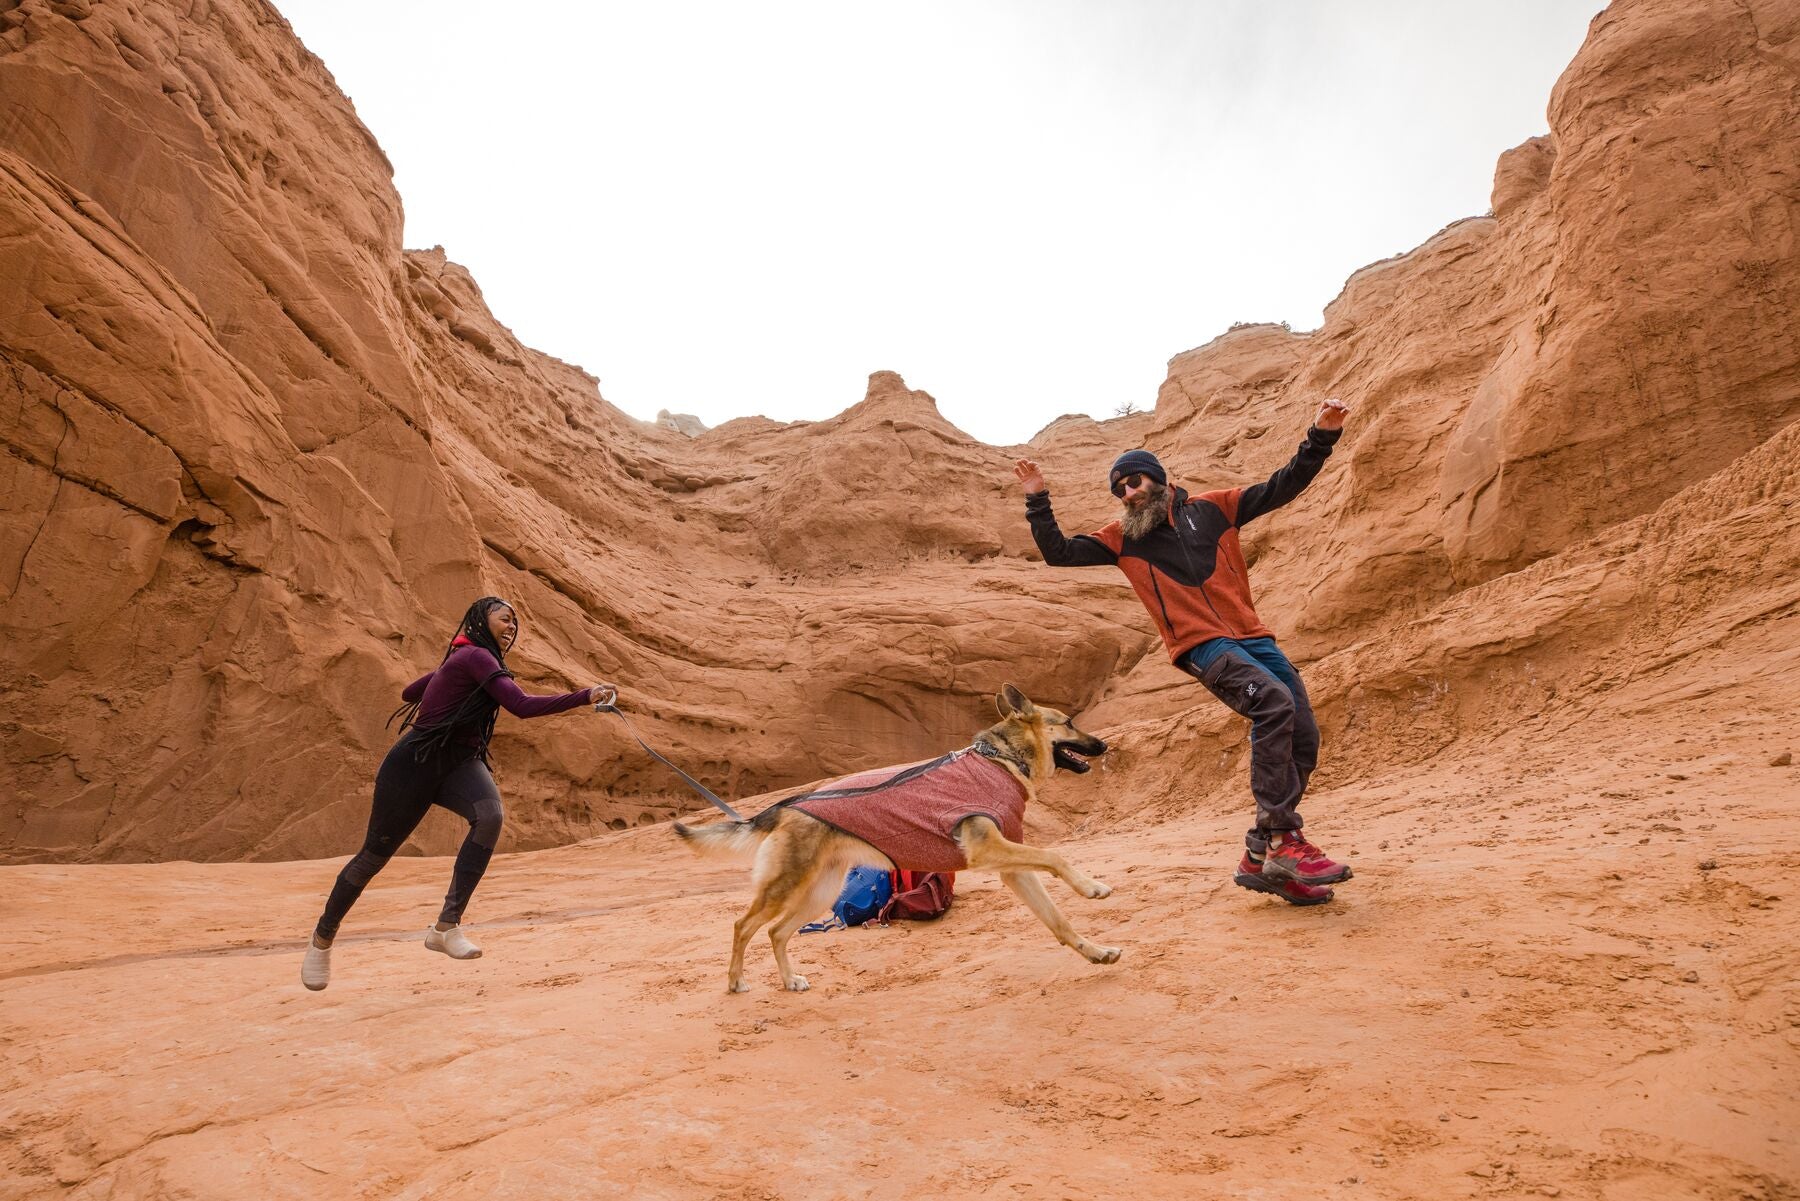 Dog and two humans hiking in desert landscape